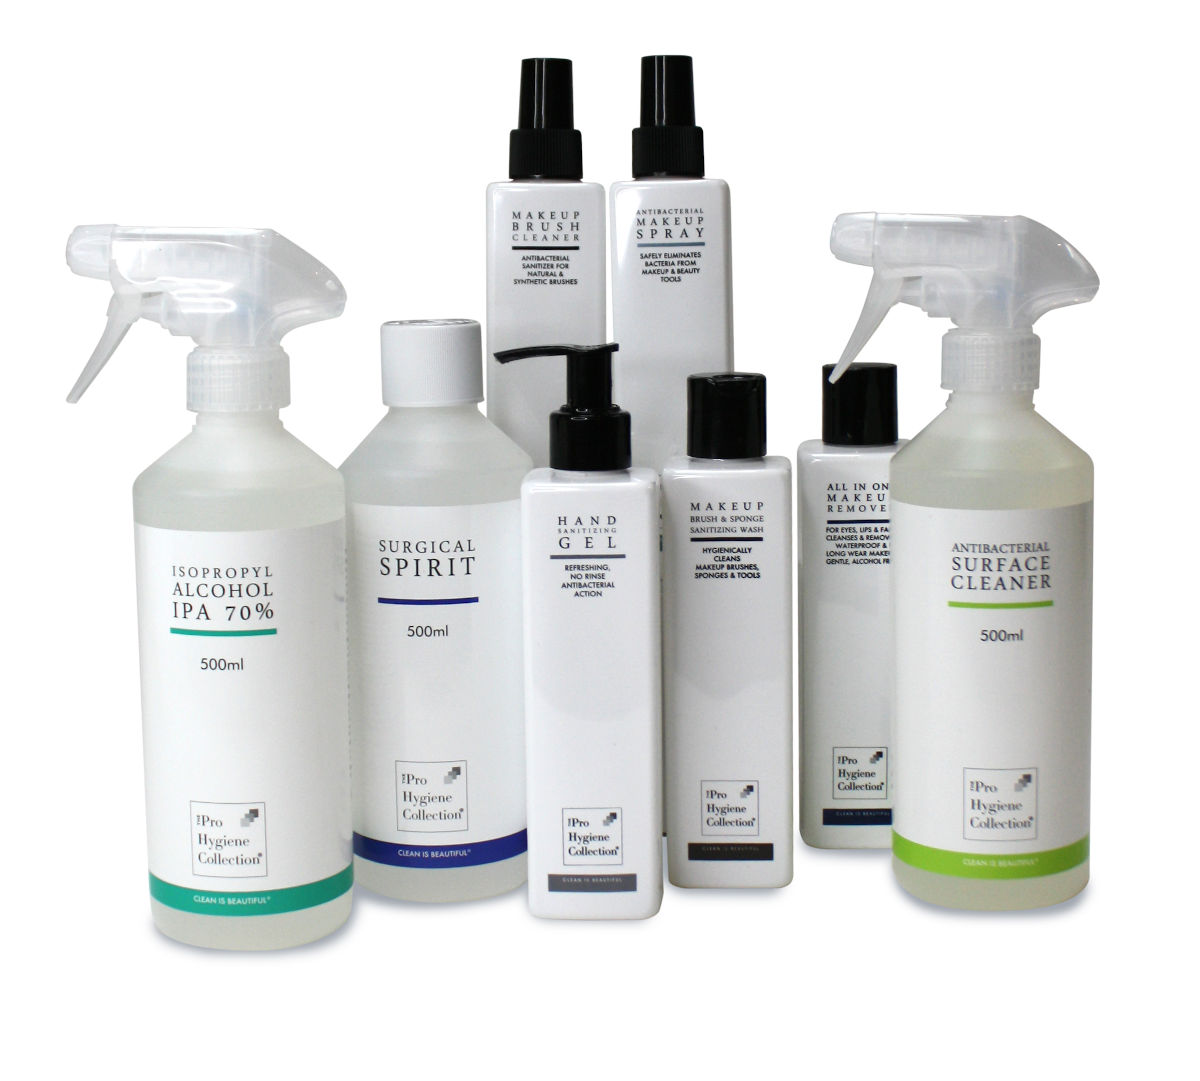 beauty hygiene products from The Pro Hygiene Collection